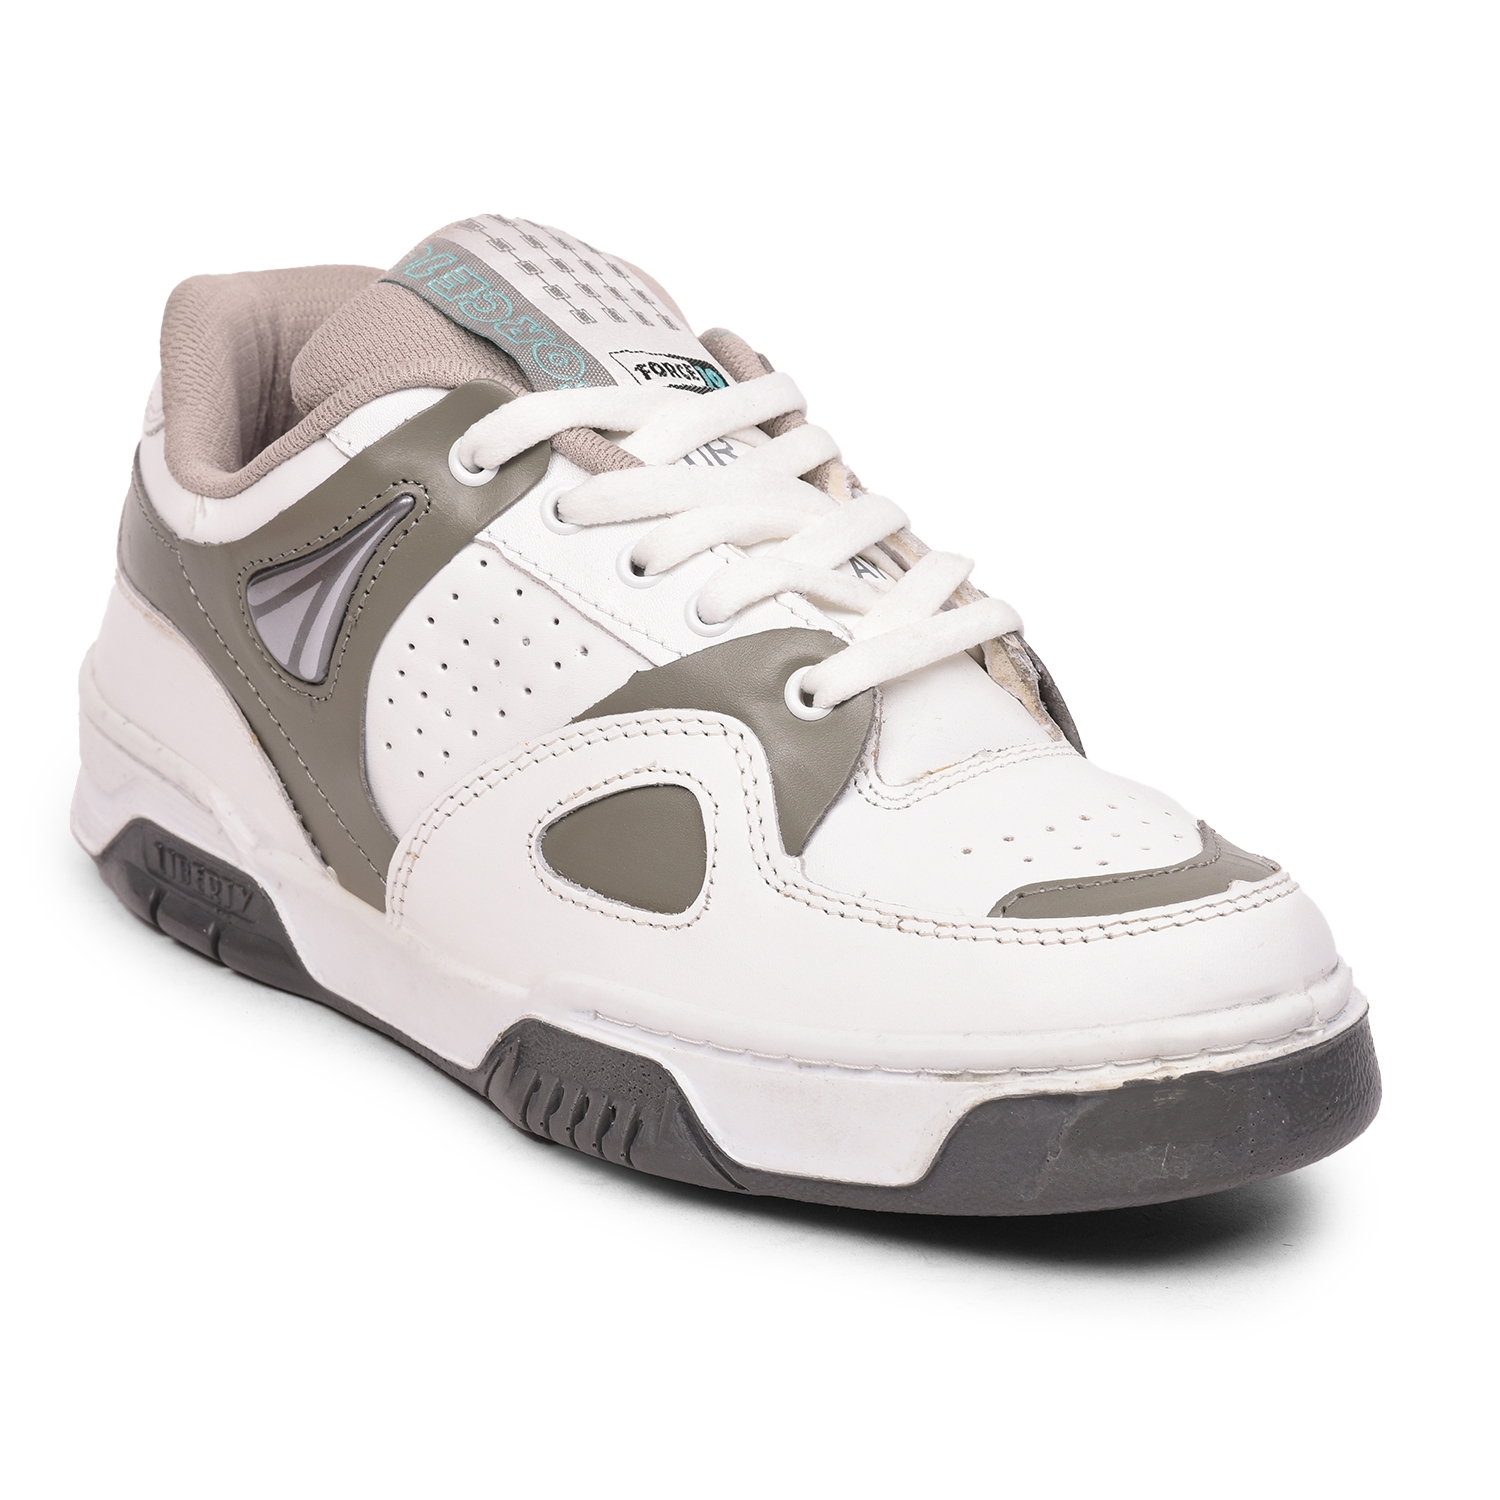 Men's Grey Lace-Up Round Toe Running Shoes